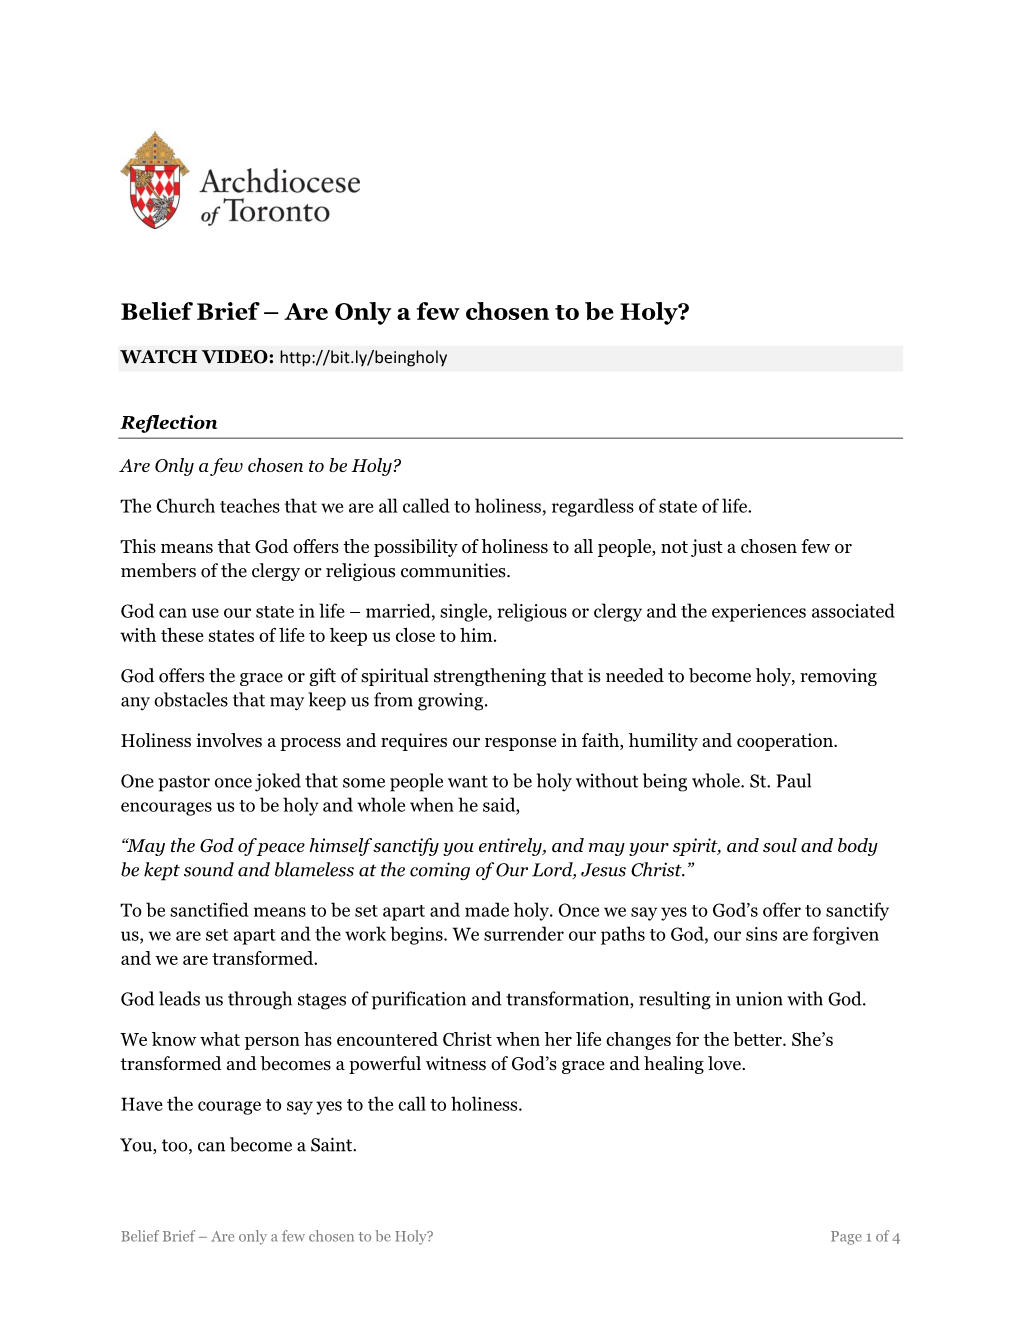 Belief Brief – Are Only a Few Chosen to Be Holy?